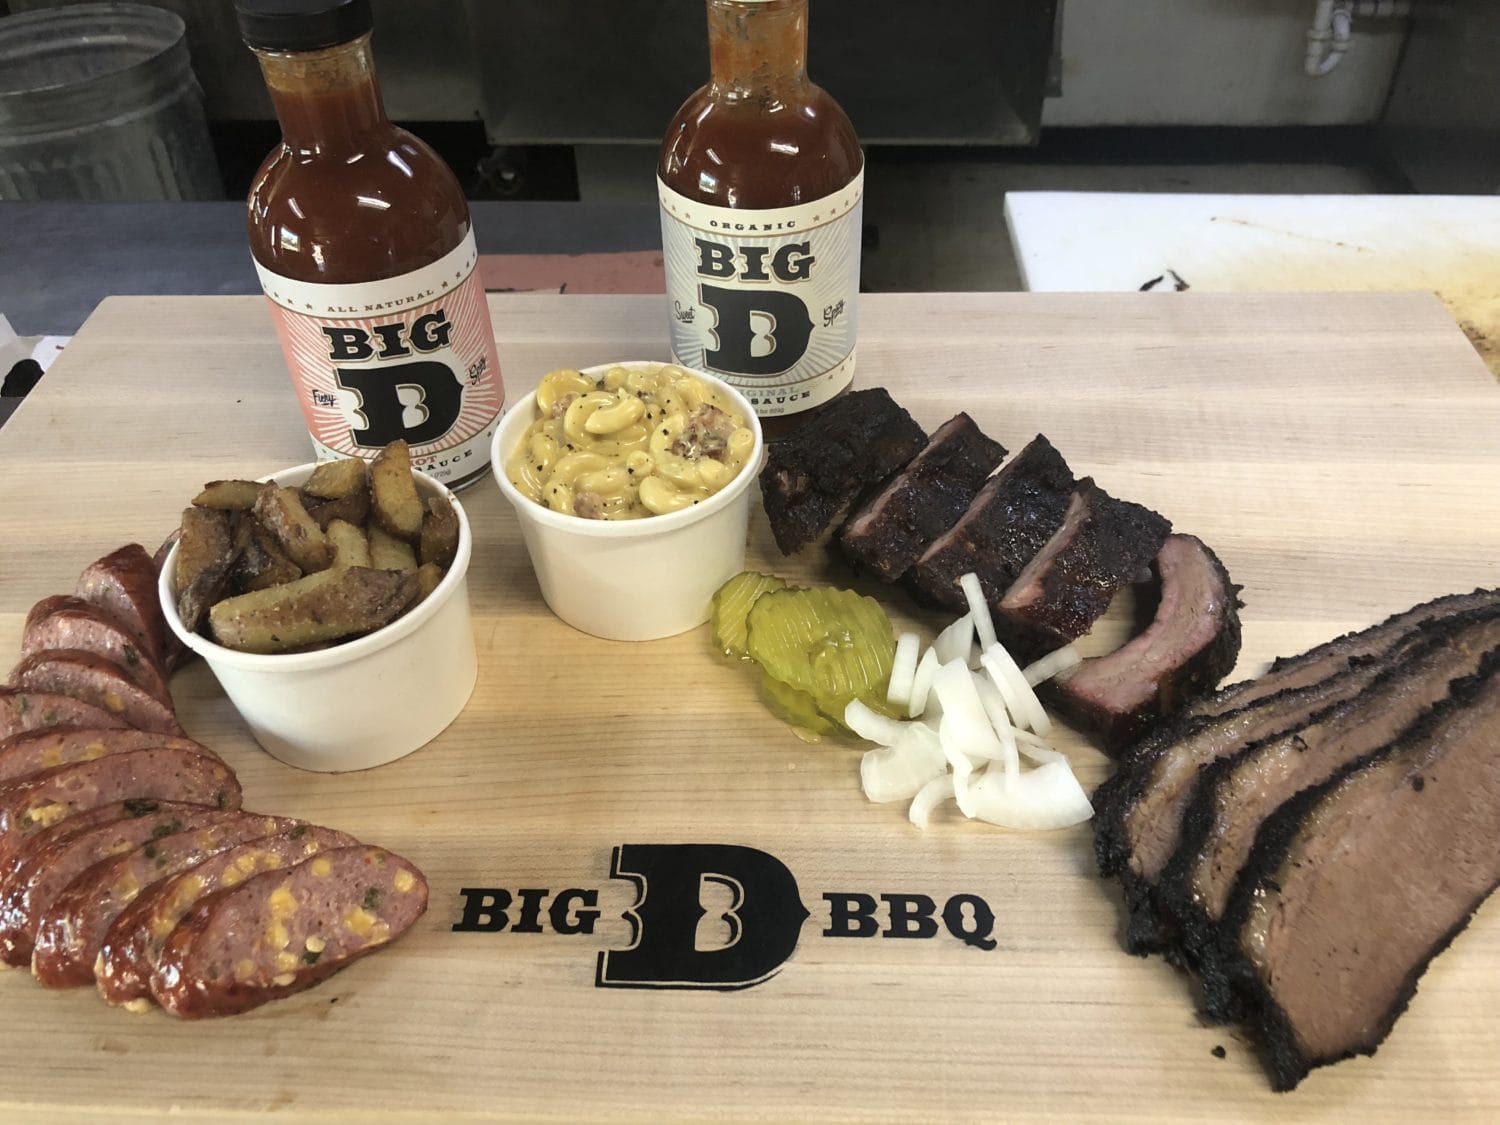 Big D Barbecue - Big D Barbecue added a new photo.